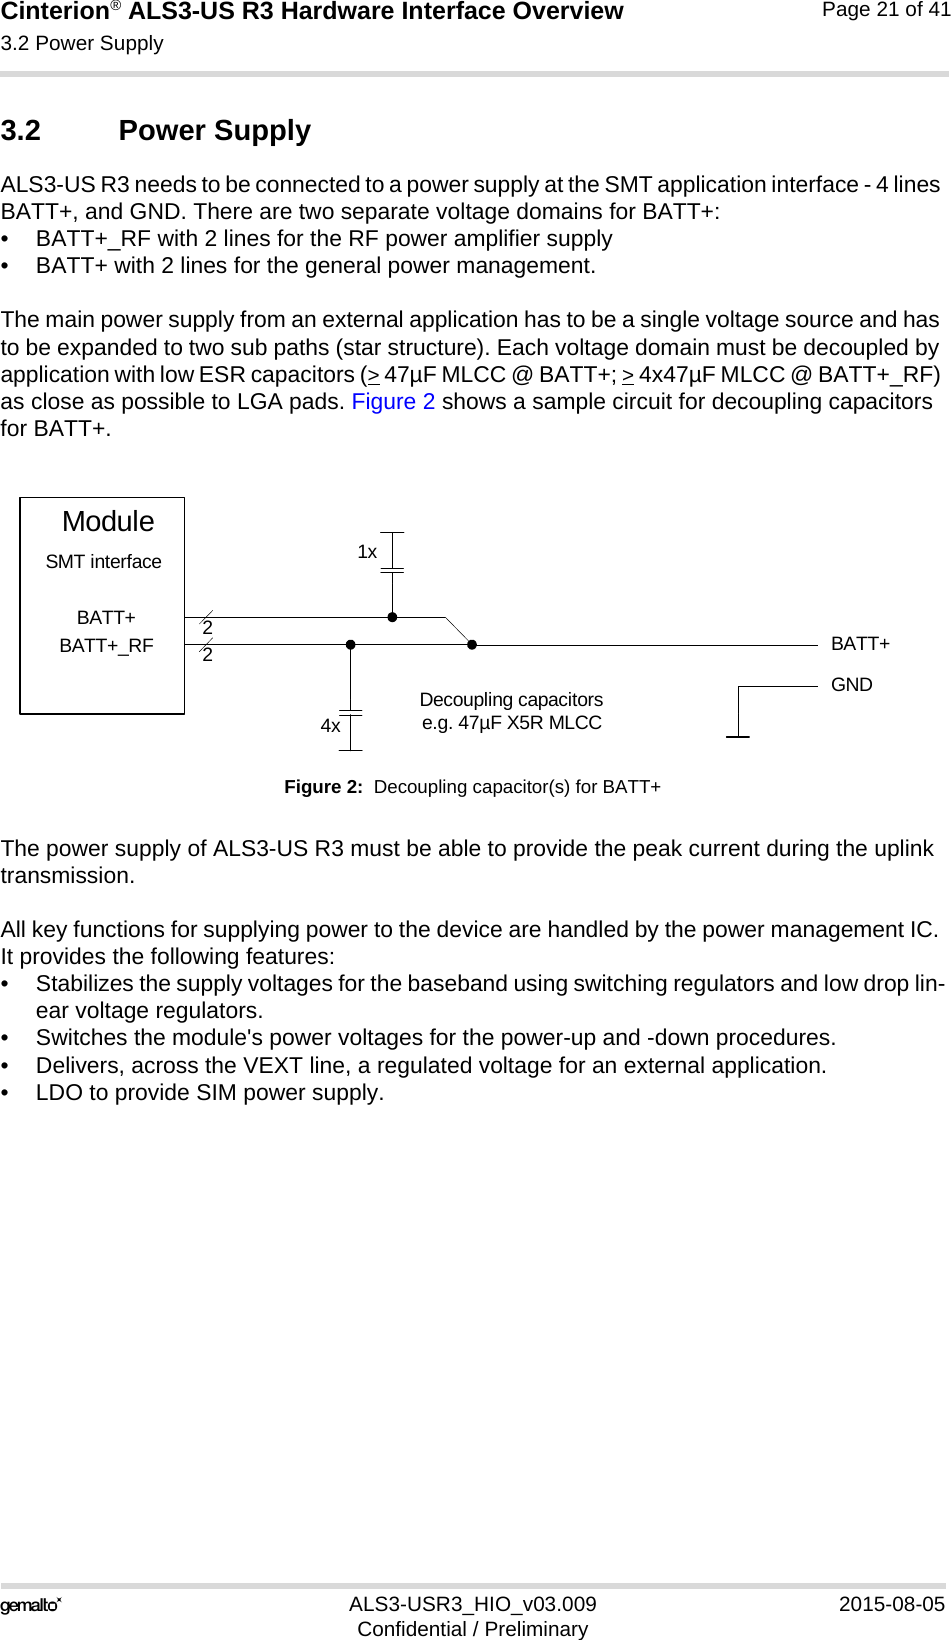 Cinterion® ALS3-US R3 Hardware Interface Overview3.2 Power Supply27ALS3-USR3_HIO_v03.009 2015-08-05Confidential / PreliminaryPage 21 of 413.2 Power SupplyALS3-US R3 needs to be connected to a power supply at the SMT application interface - 4 lines BATT+, and GND. There are two separate voltage domains for BATT+:• BATT+_RF with 2 lines for the RF power amplifier supply • BATT+ with 2 lines for the general power management. The main power supply from an external application has to be a single voltage source and has to be expanded to two sub paths (star structure). Each voltage domain must be decoupled by application with low ESR capacitors (&gt; 47µF MLCC @ BATT+; &gt; 4x47µF MLCC @ BATT+_RF) as close as possible to LGA pads. Figure 2 shows a sample circuit for decoupling capacitors for BATT+.Figure 2:  Decoupling capacitor(s) for BATT+The power supply of ALS3-US R3 must be able to provide the peak current during the uplink transmission. All key functions for supplying power to the device are handled by the power management IC. It provides the following features:• Stabilizes the supply voltages for the baseband using switching regulators and low drop lin-ear voltage regulators.• Switches the module&apos;s power voltages for the power-up and -down procedures.• Delivers, across the VEXT line, a regulated voltage for an external application.• LDO to provide SIM power supply.BATT+22Decoupling capacitorse.g. 47µF X5R MLCC4xGNDBATT+BATT+_RFModuleSMT interface 1x